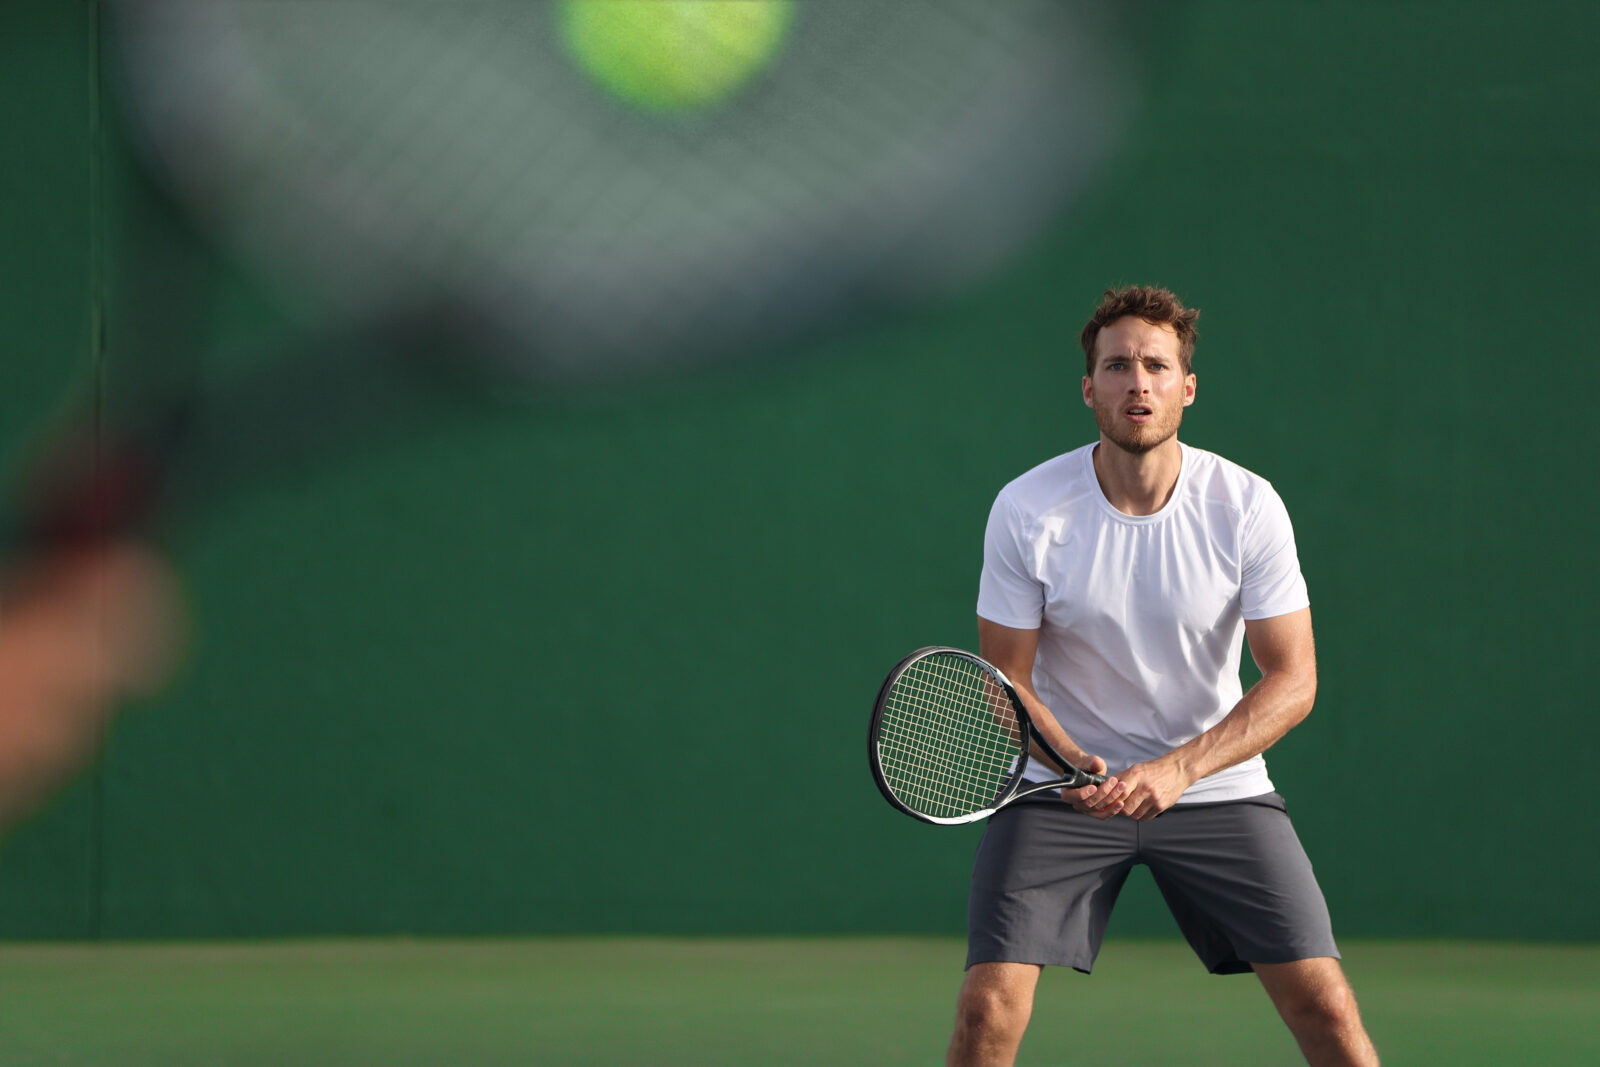 Tennis player focused on other player hitting ball with racket on court. Men sport athletes players playing tennis match together. Two professional tennis players on hard outdoor court during game.